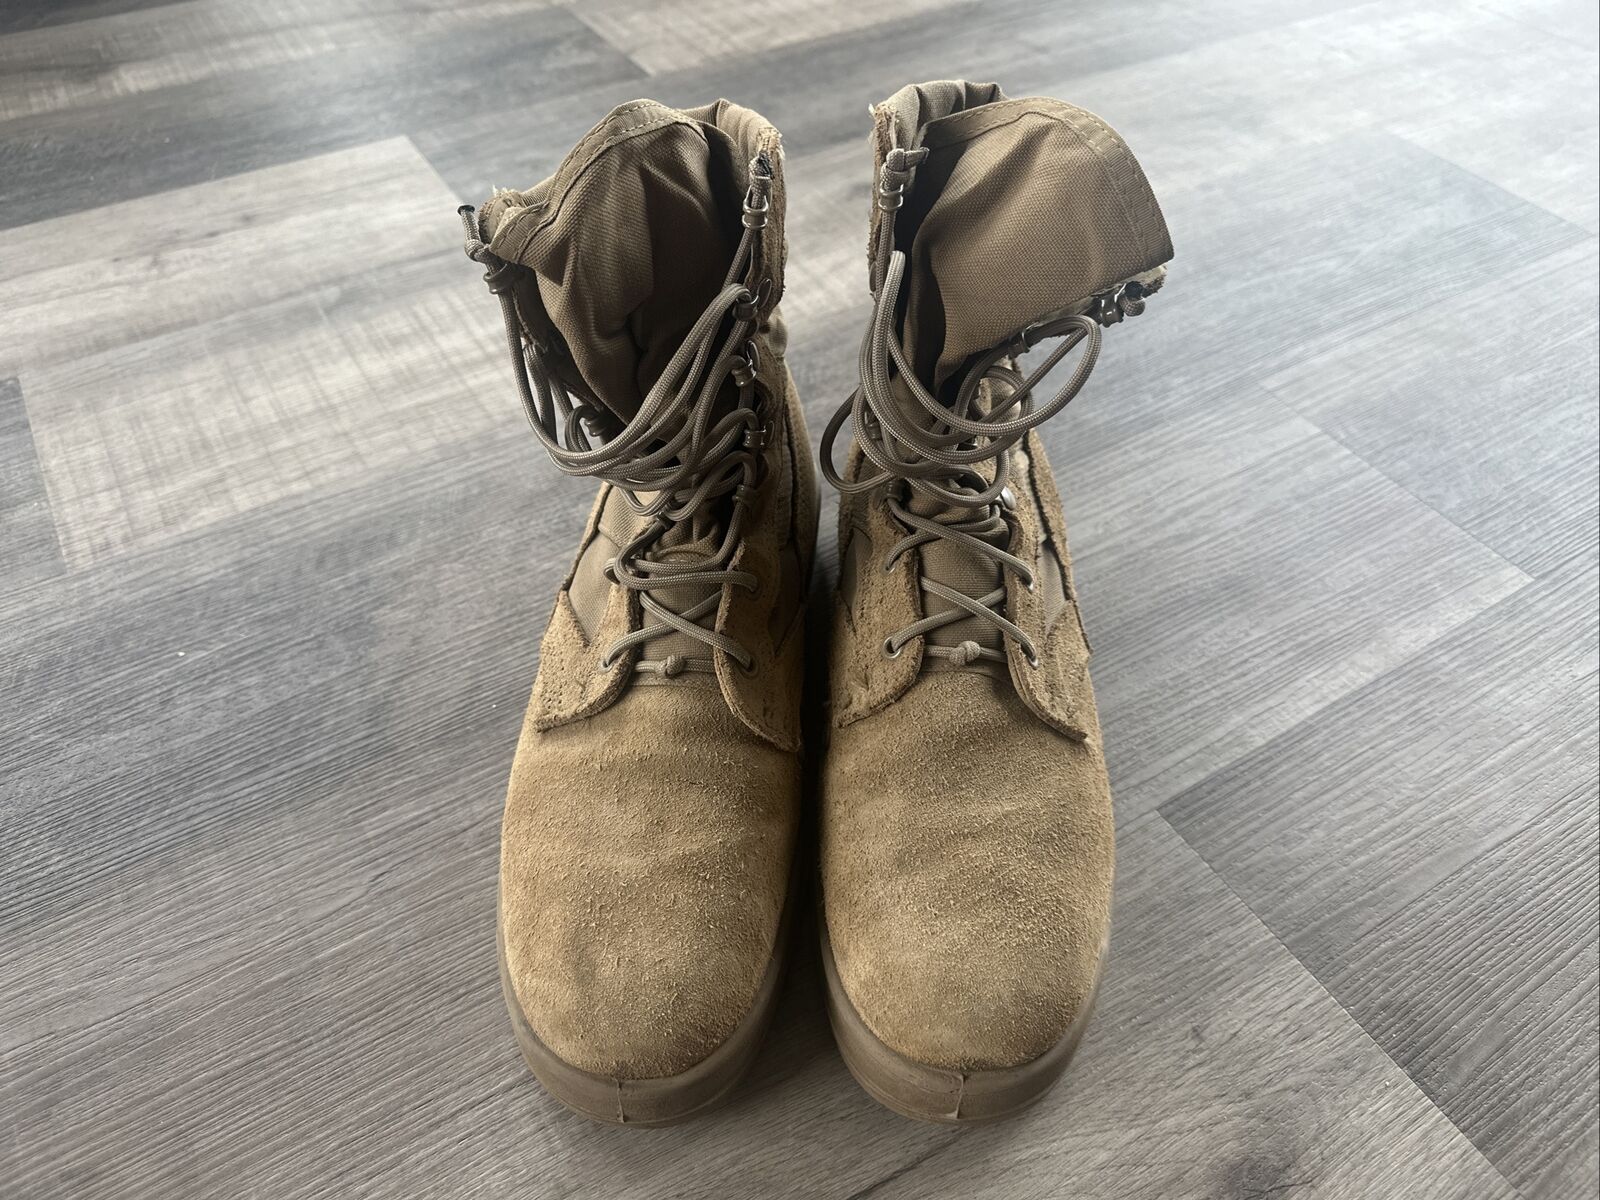 US Army Issue Hot Weather Combat Military Boots Coyote Tan Men’s Size 10.5 Reg